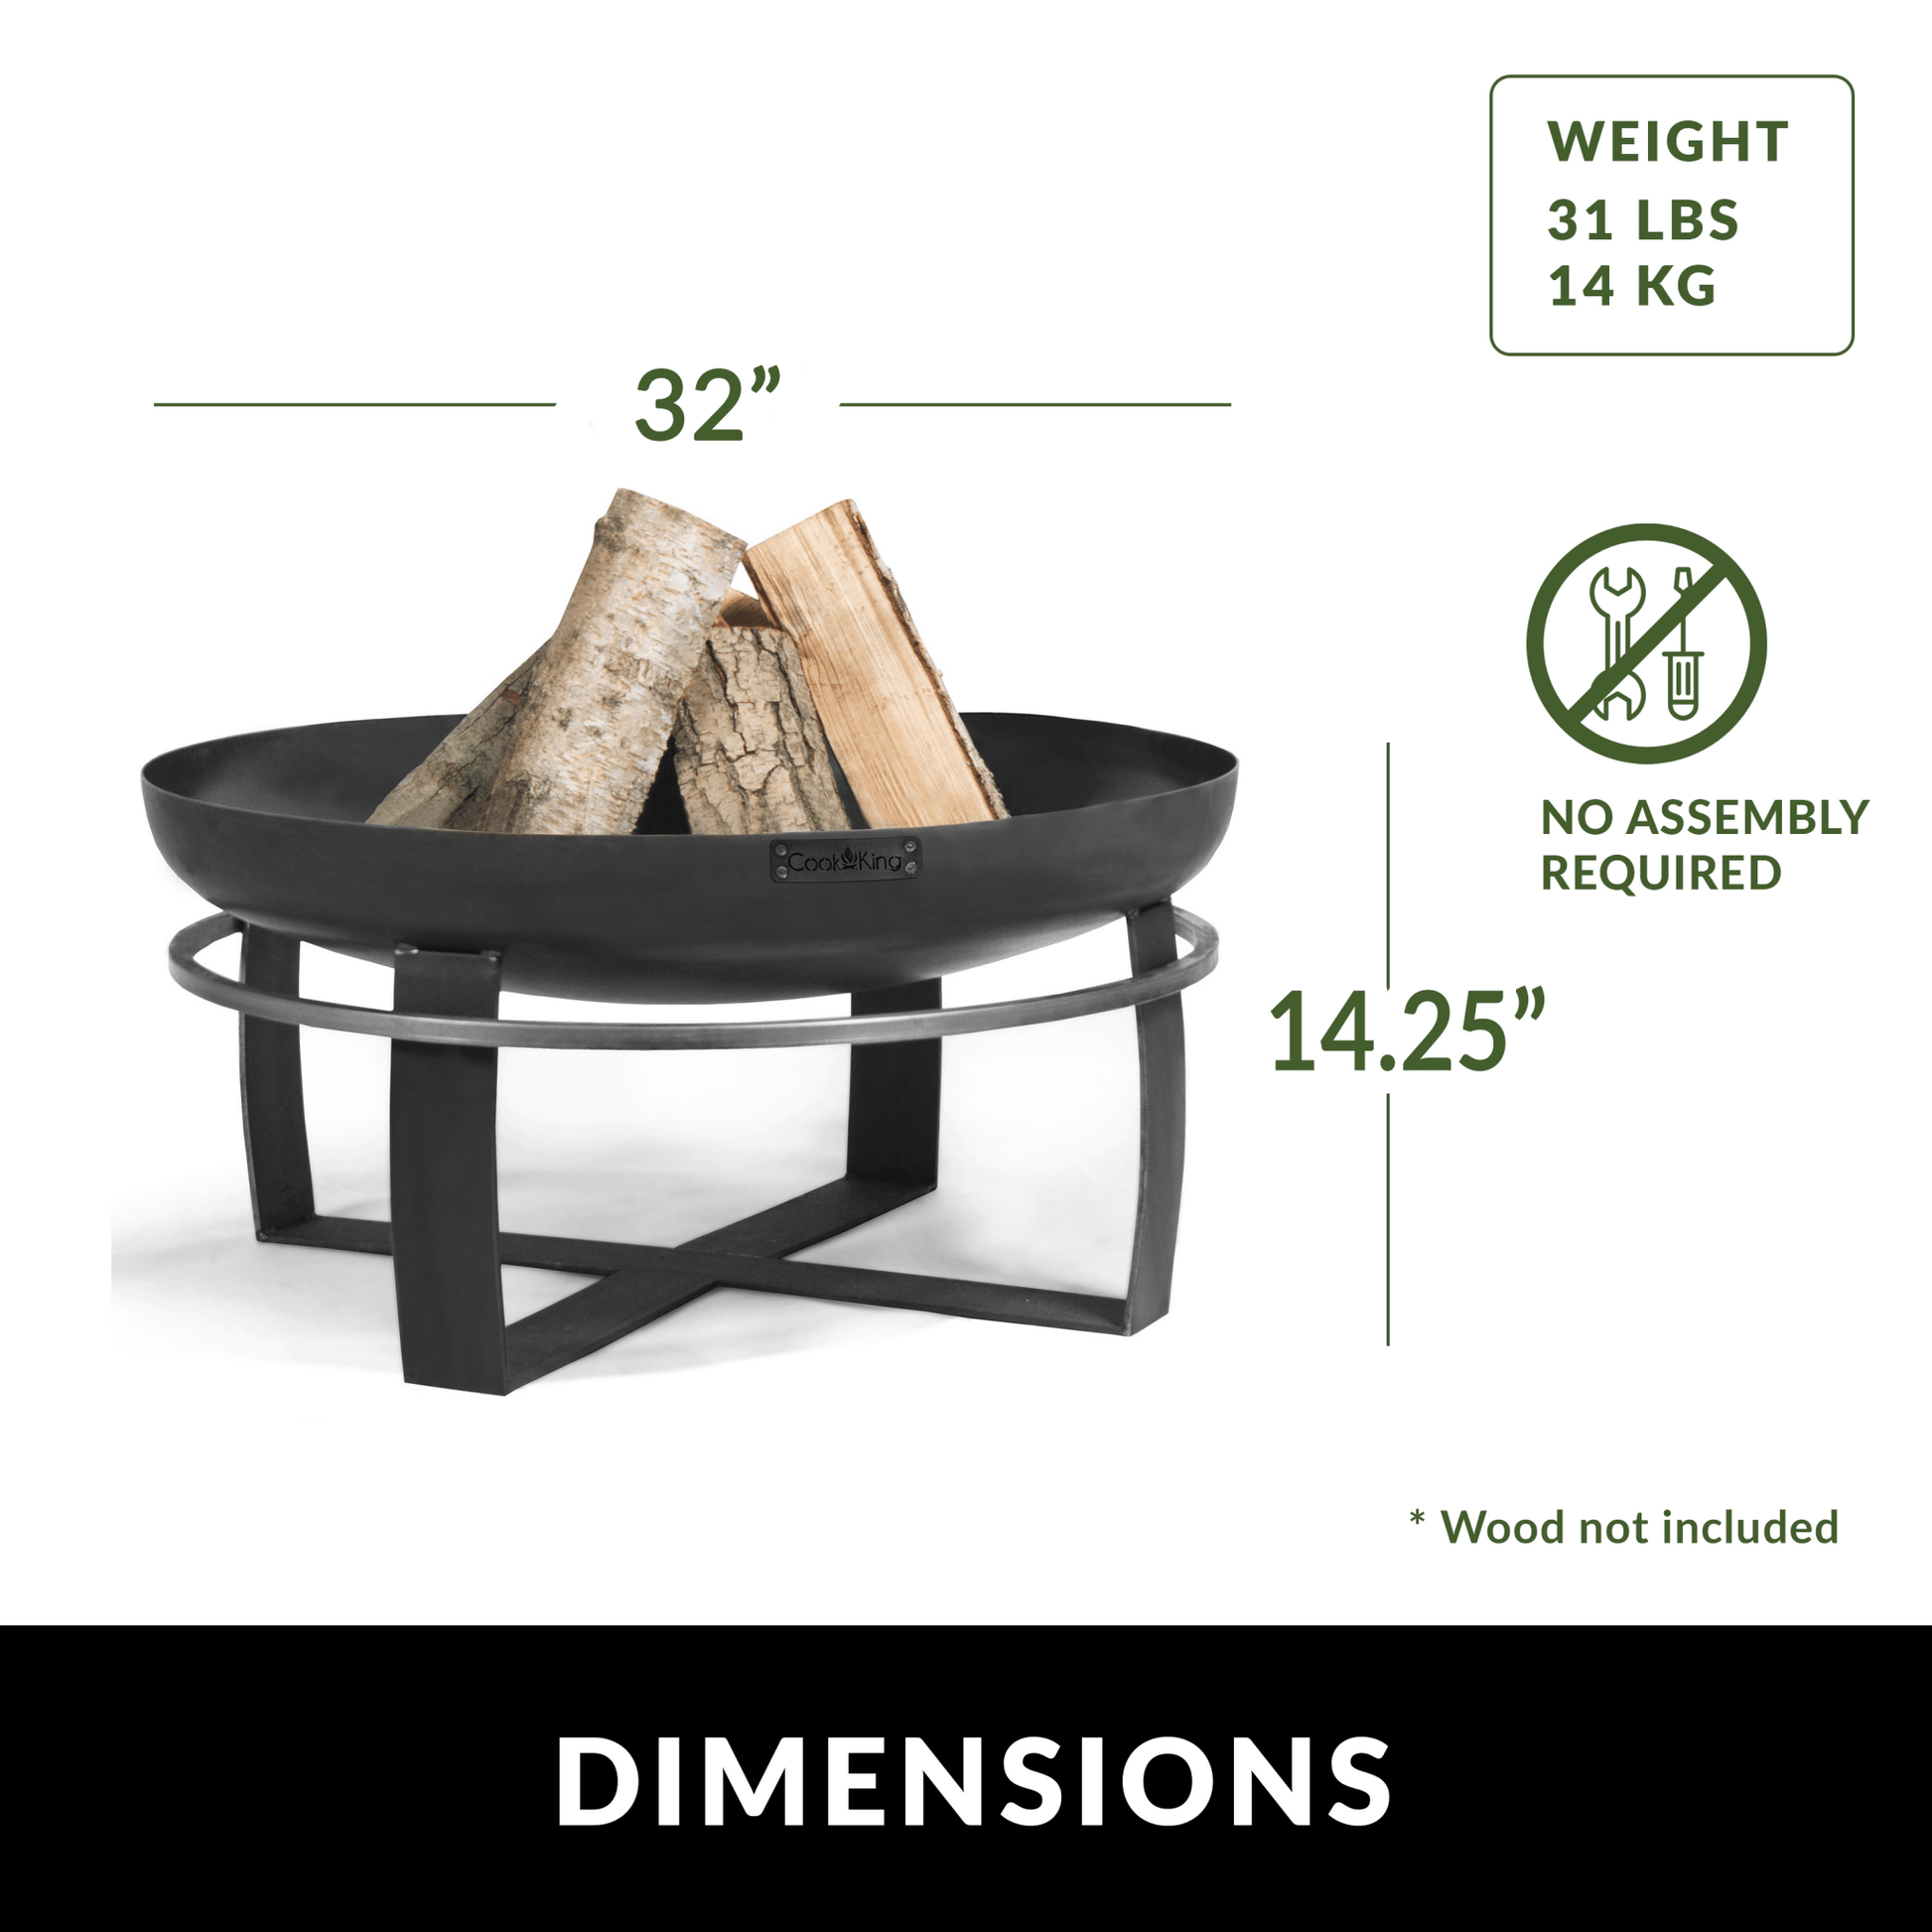 Viking 32" Fire Pit - Good Directions